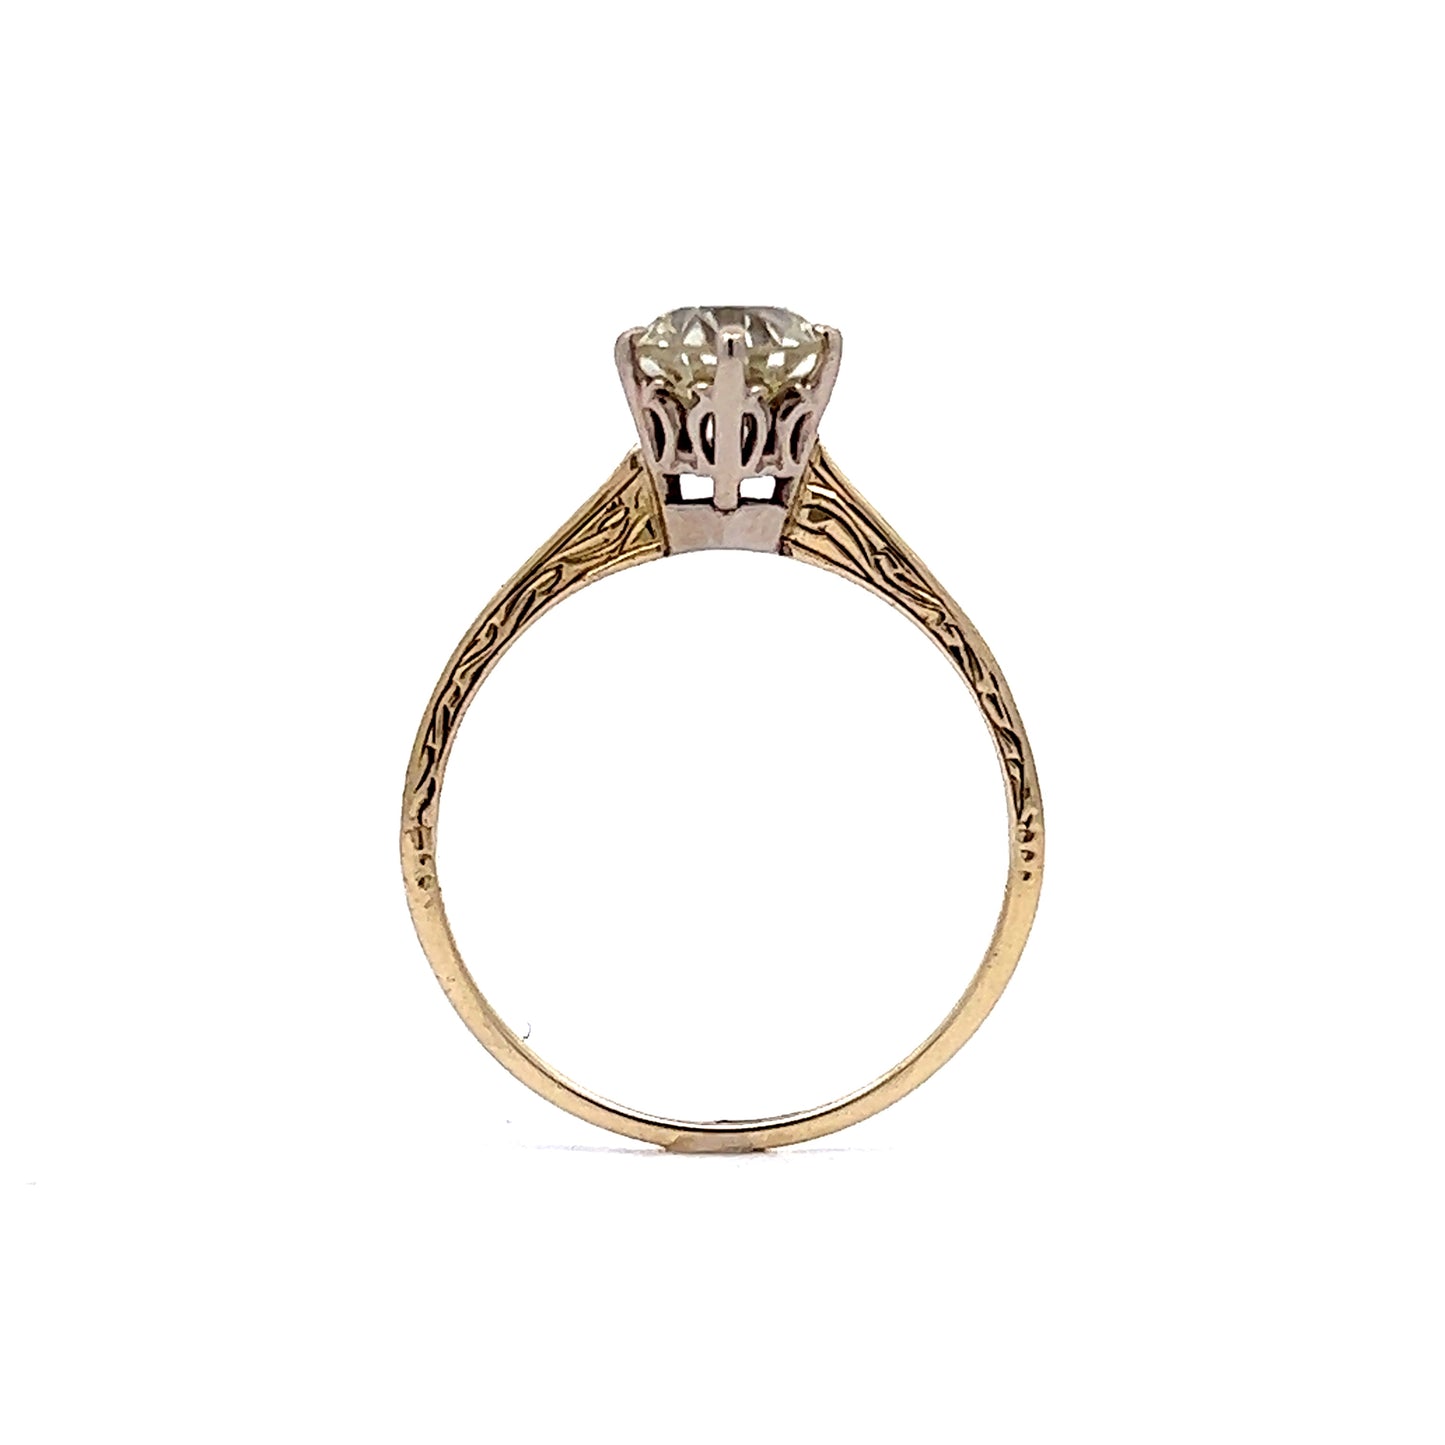 Vintage 1.41 Old European Solitaire Engagement Ring in 14k Yellow Gold